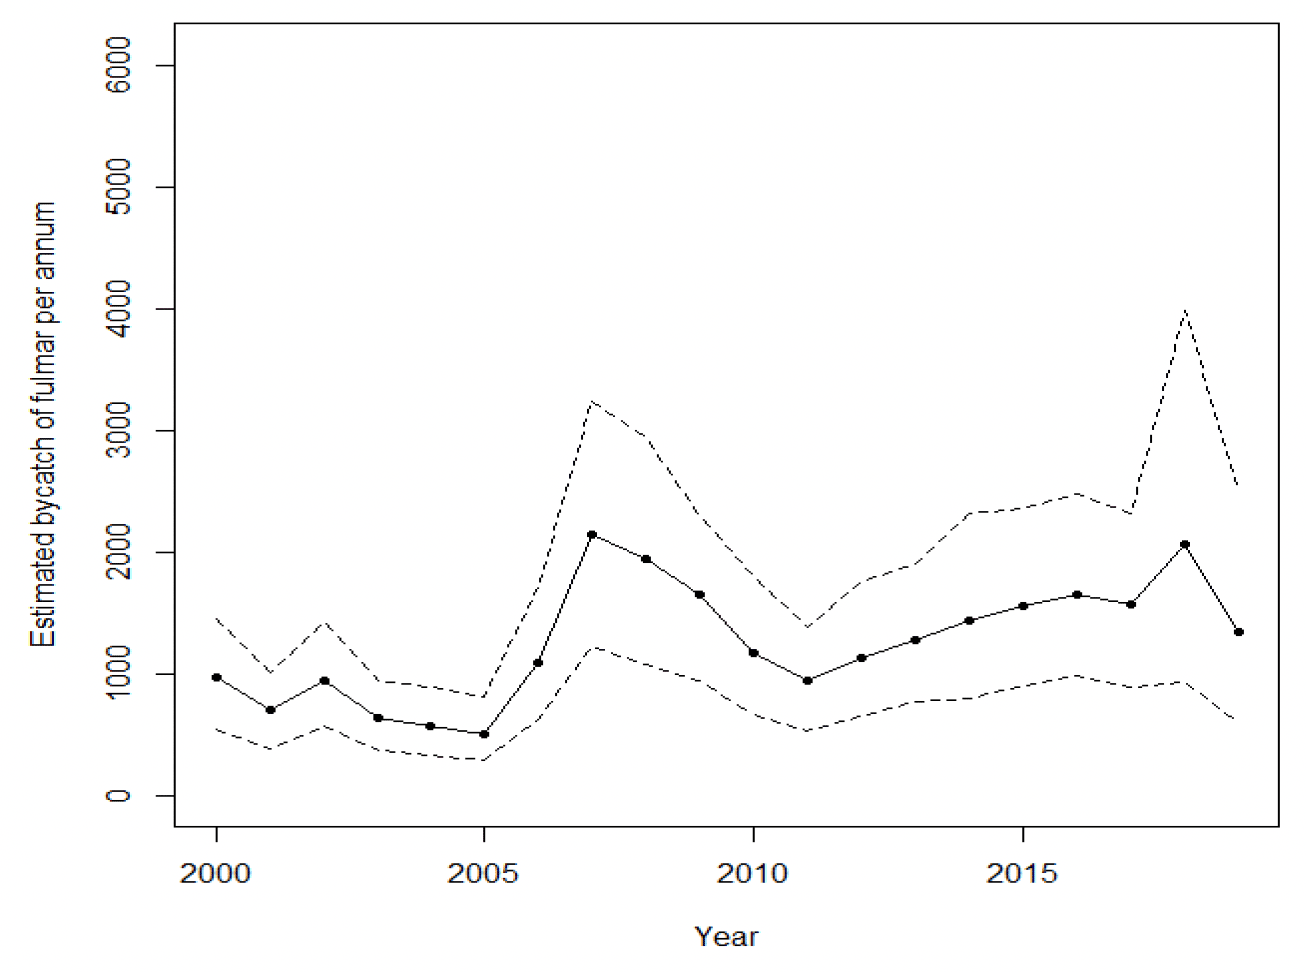 Trend line in annual fulmar mortality from less than 1000 birds in the early 2000s to over 2000 in 2007, then fluctuating down and up again to a similar level in 2018.